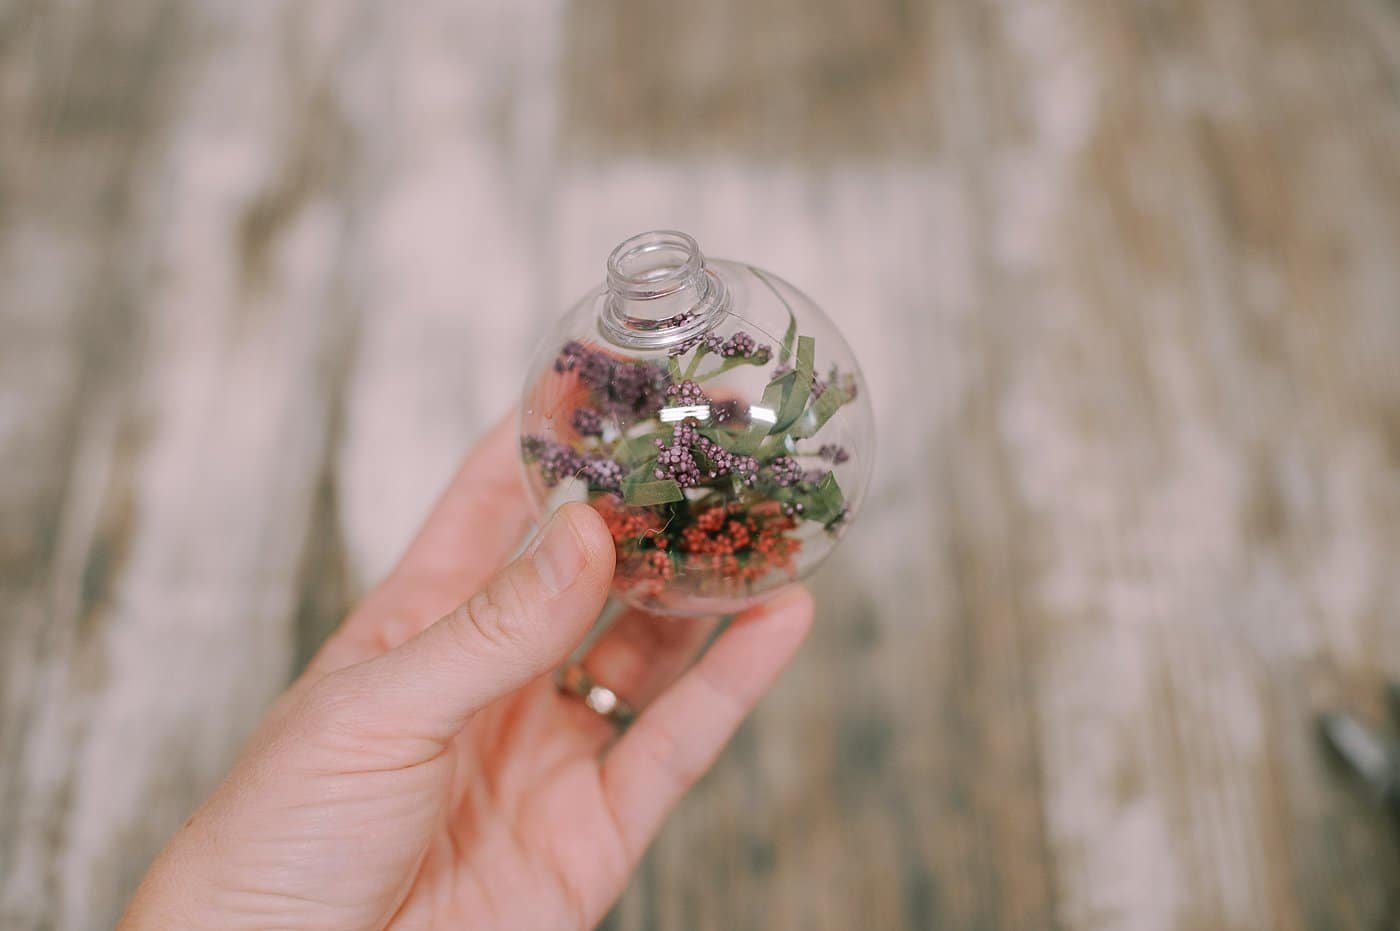 Put fake flowers into the glass or plastic christmas ball ornament.